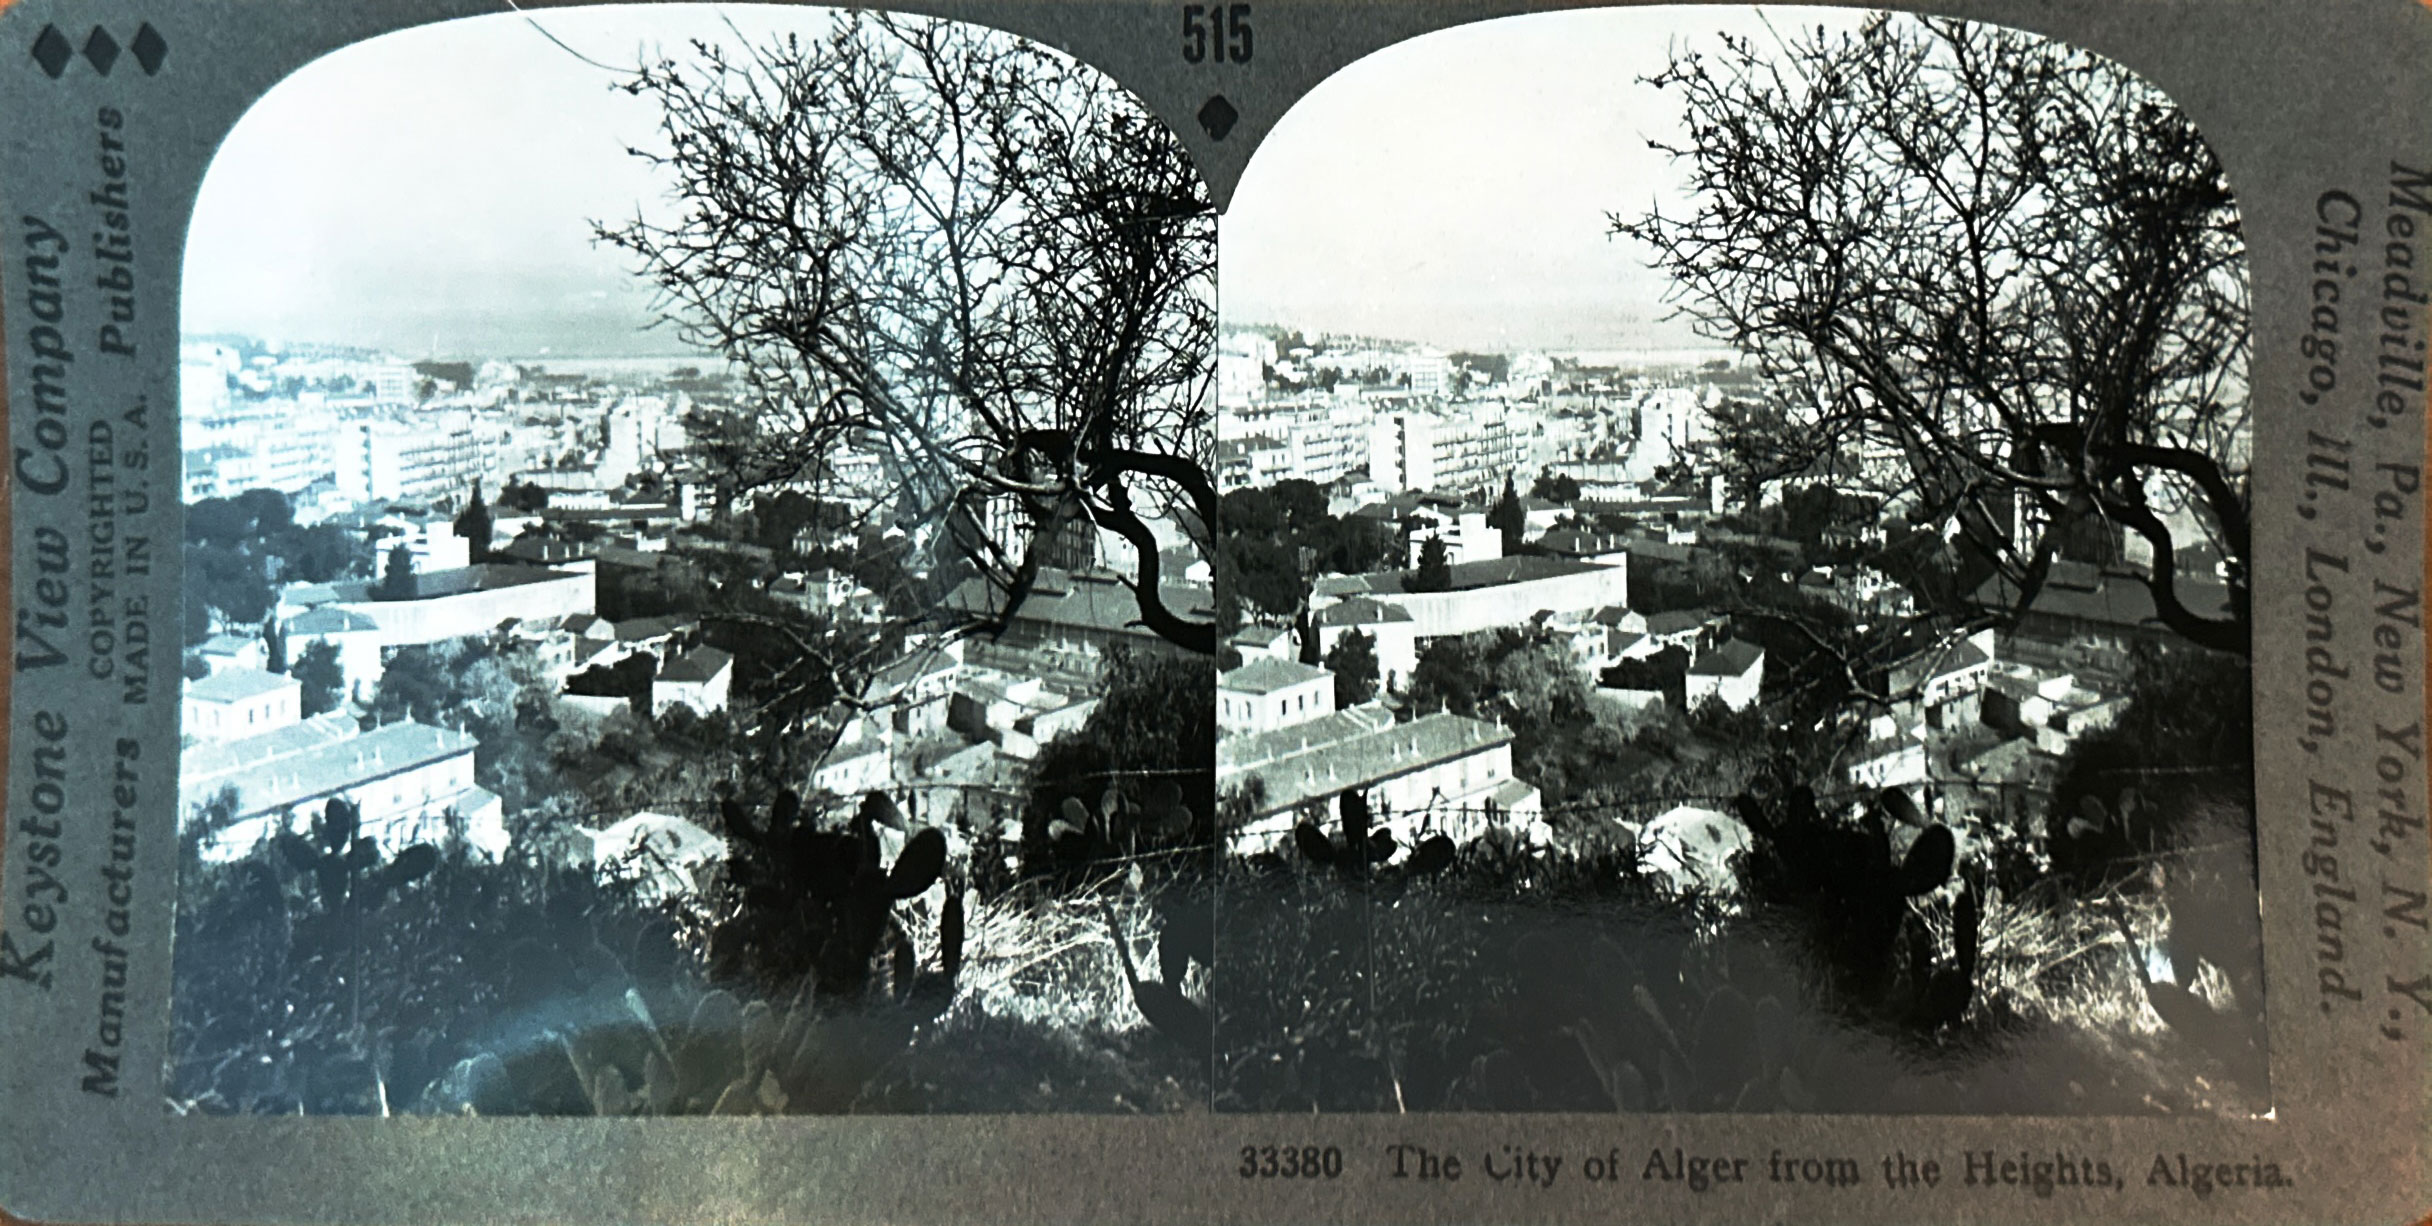 <p>The city of Alger from the Heights. Algeria. (sic)</p>